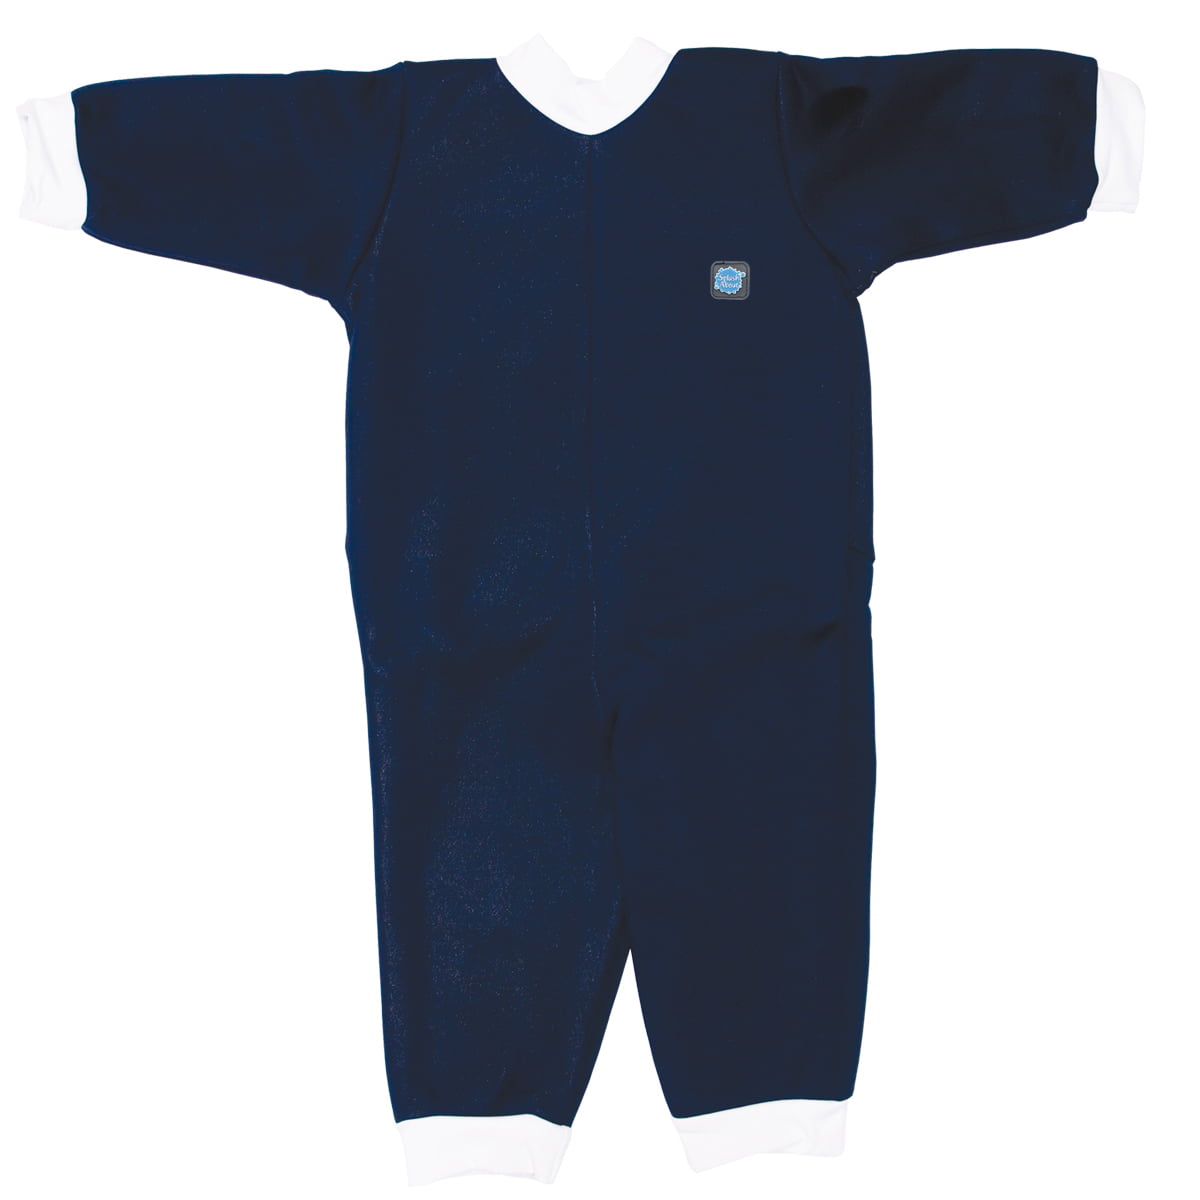 Details about   Splash About WarmInOne Baby Wet Suit Navy Blue & White Large 6-12 Months